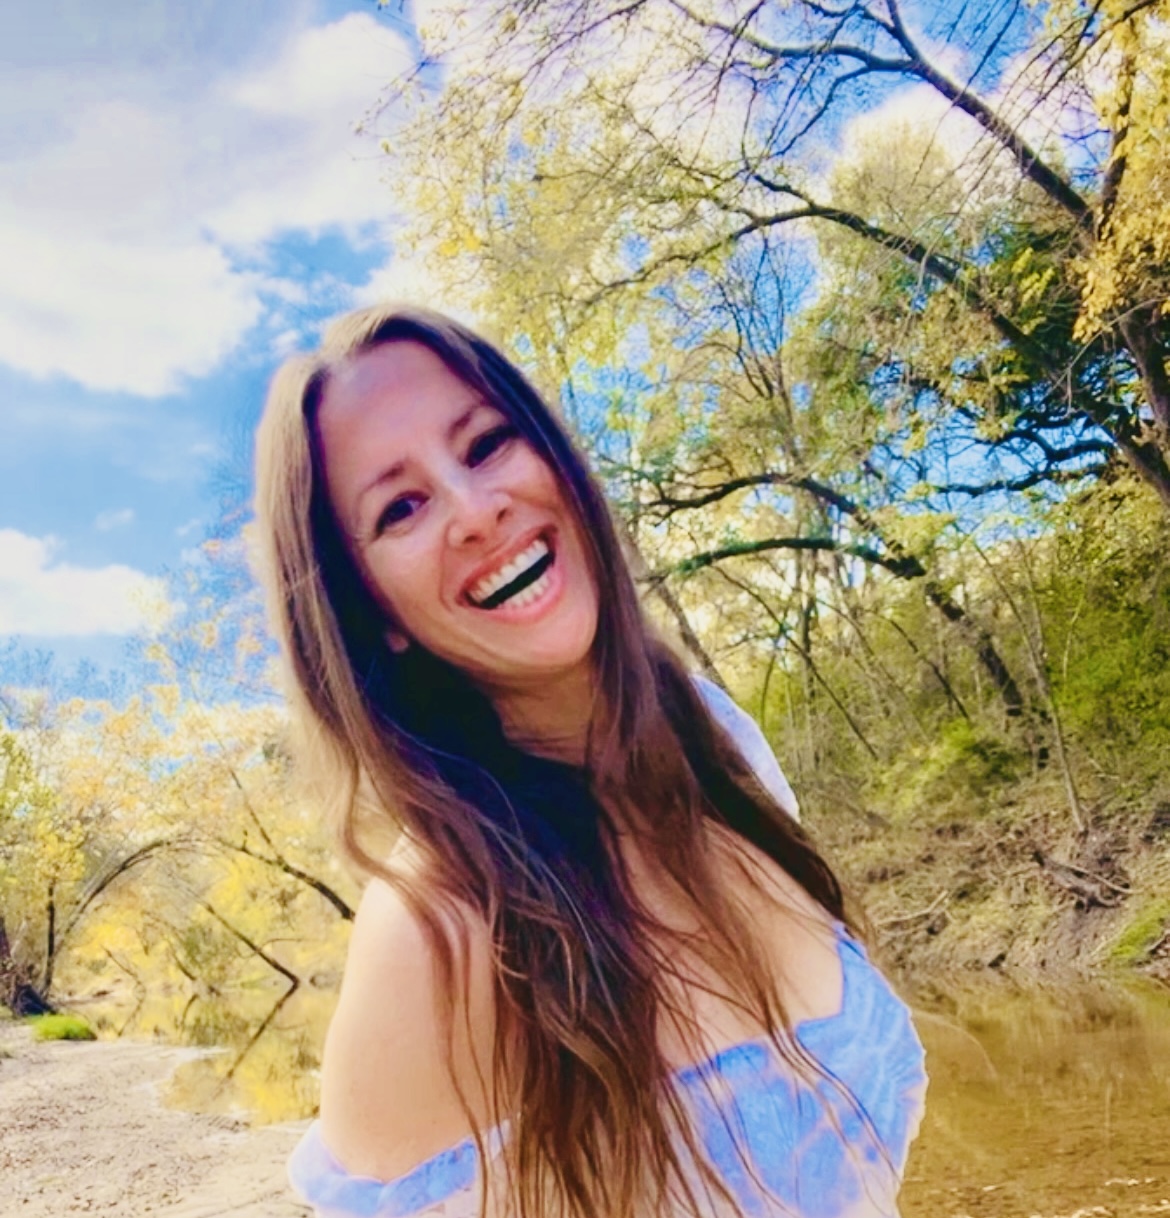 Roots & Wings 🌲🦋 3-month Private 1:1 Mentorship. Step into your power, confidence, worth & purpose. Overcome limiting beliefs to live your God-given dreams! 🌈 thumbnail